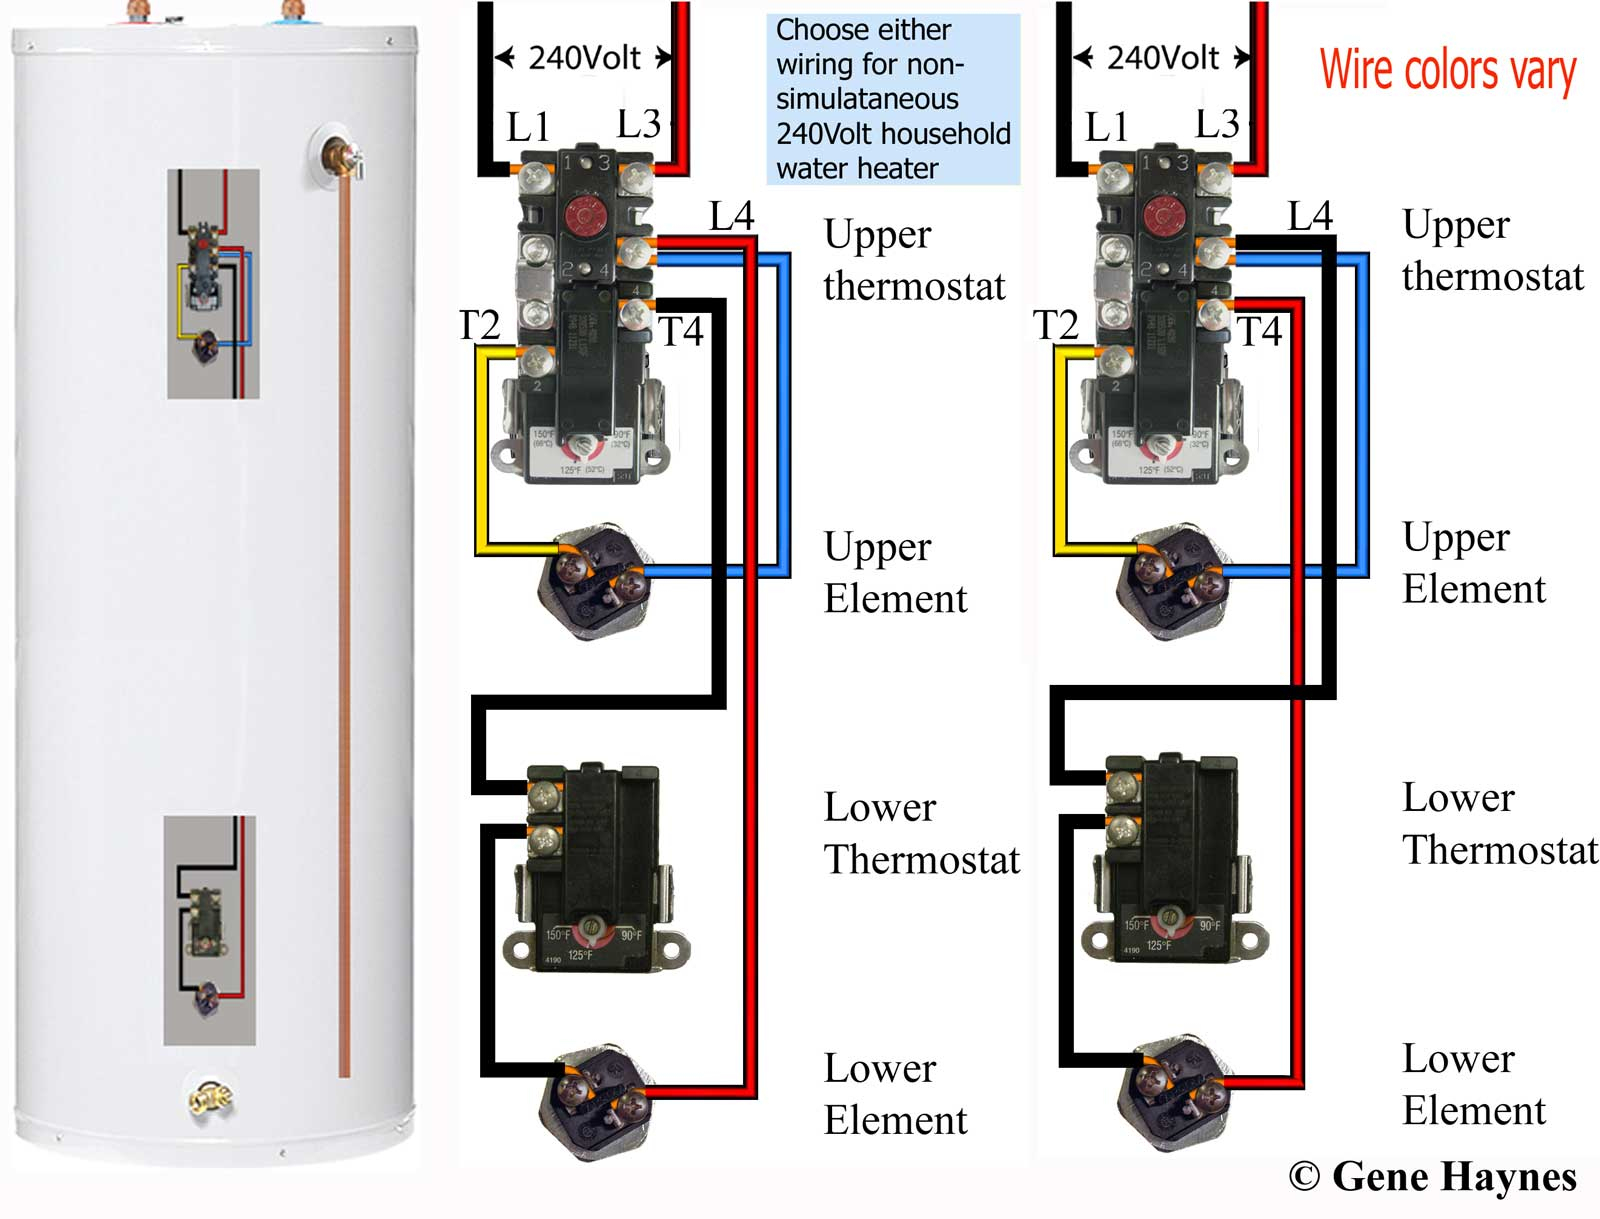 How To Wire Water Heater Thermostats - Water Heater Wiring Diagram